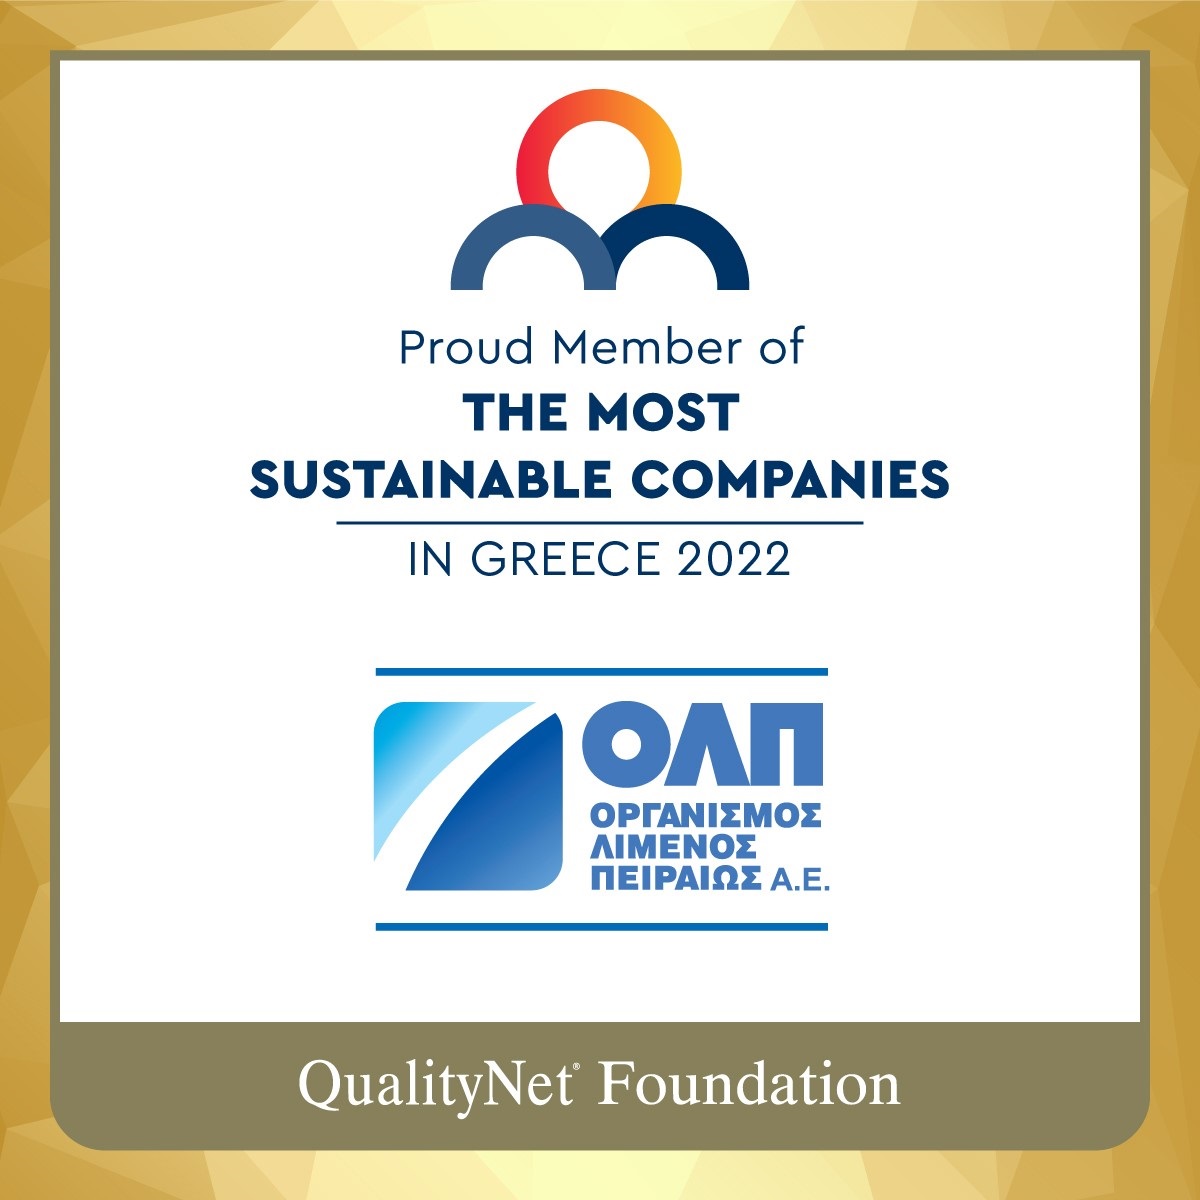 olp the most sustainable companies